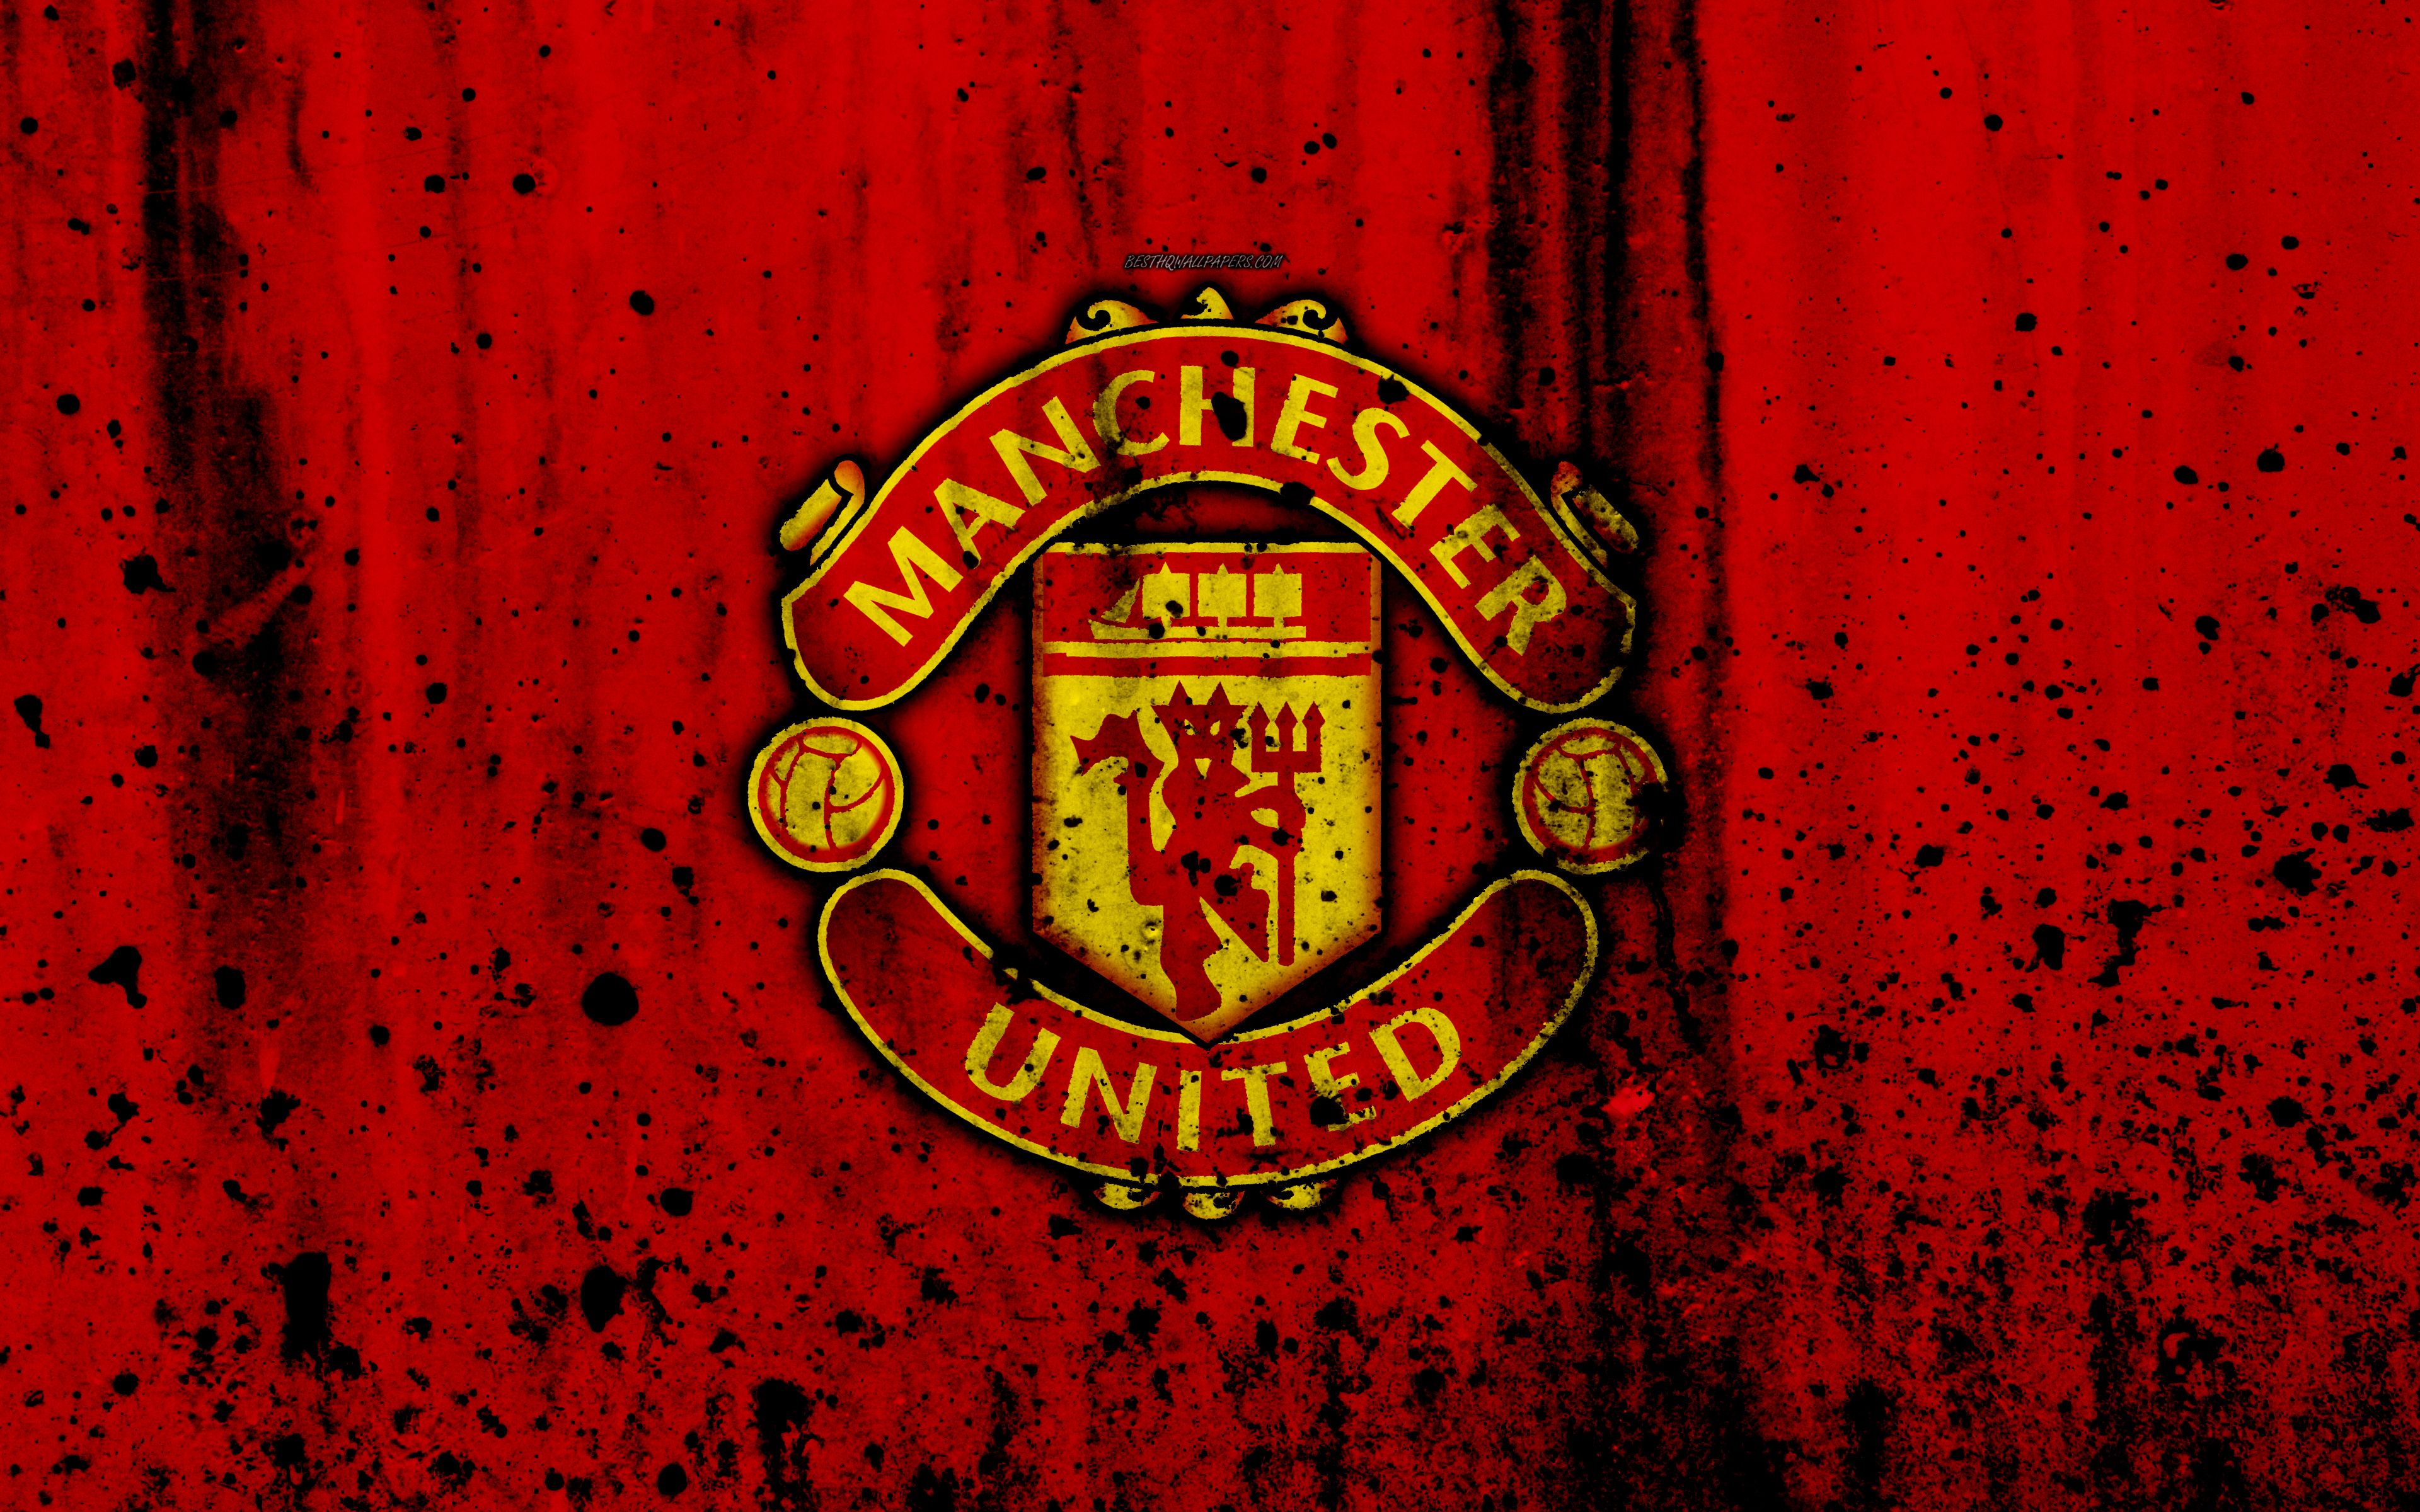 Man Utd HD Logo Wallapapers for Desktop [2021 Collection ...